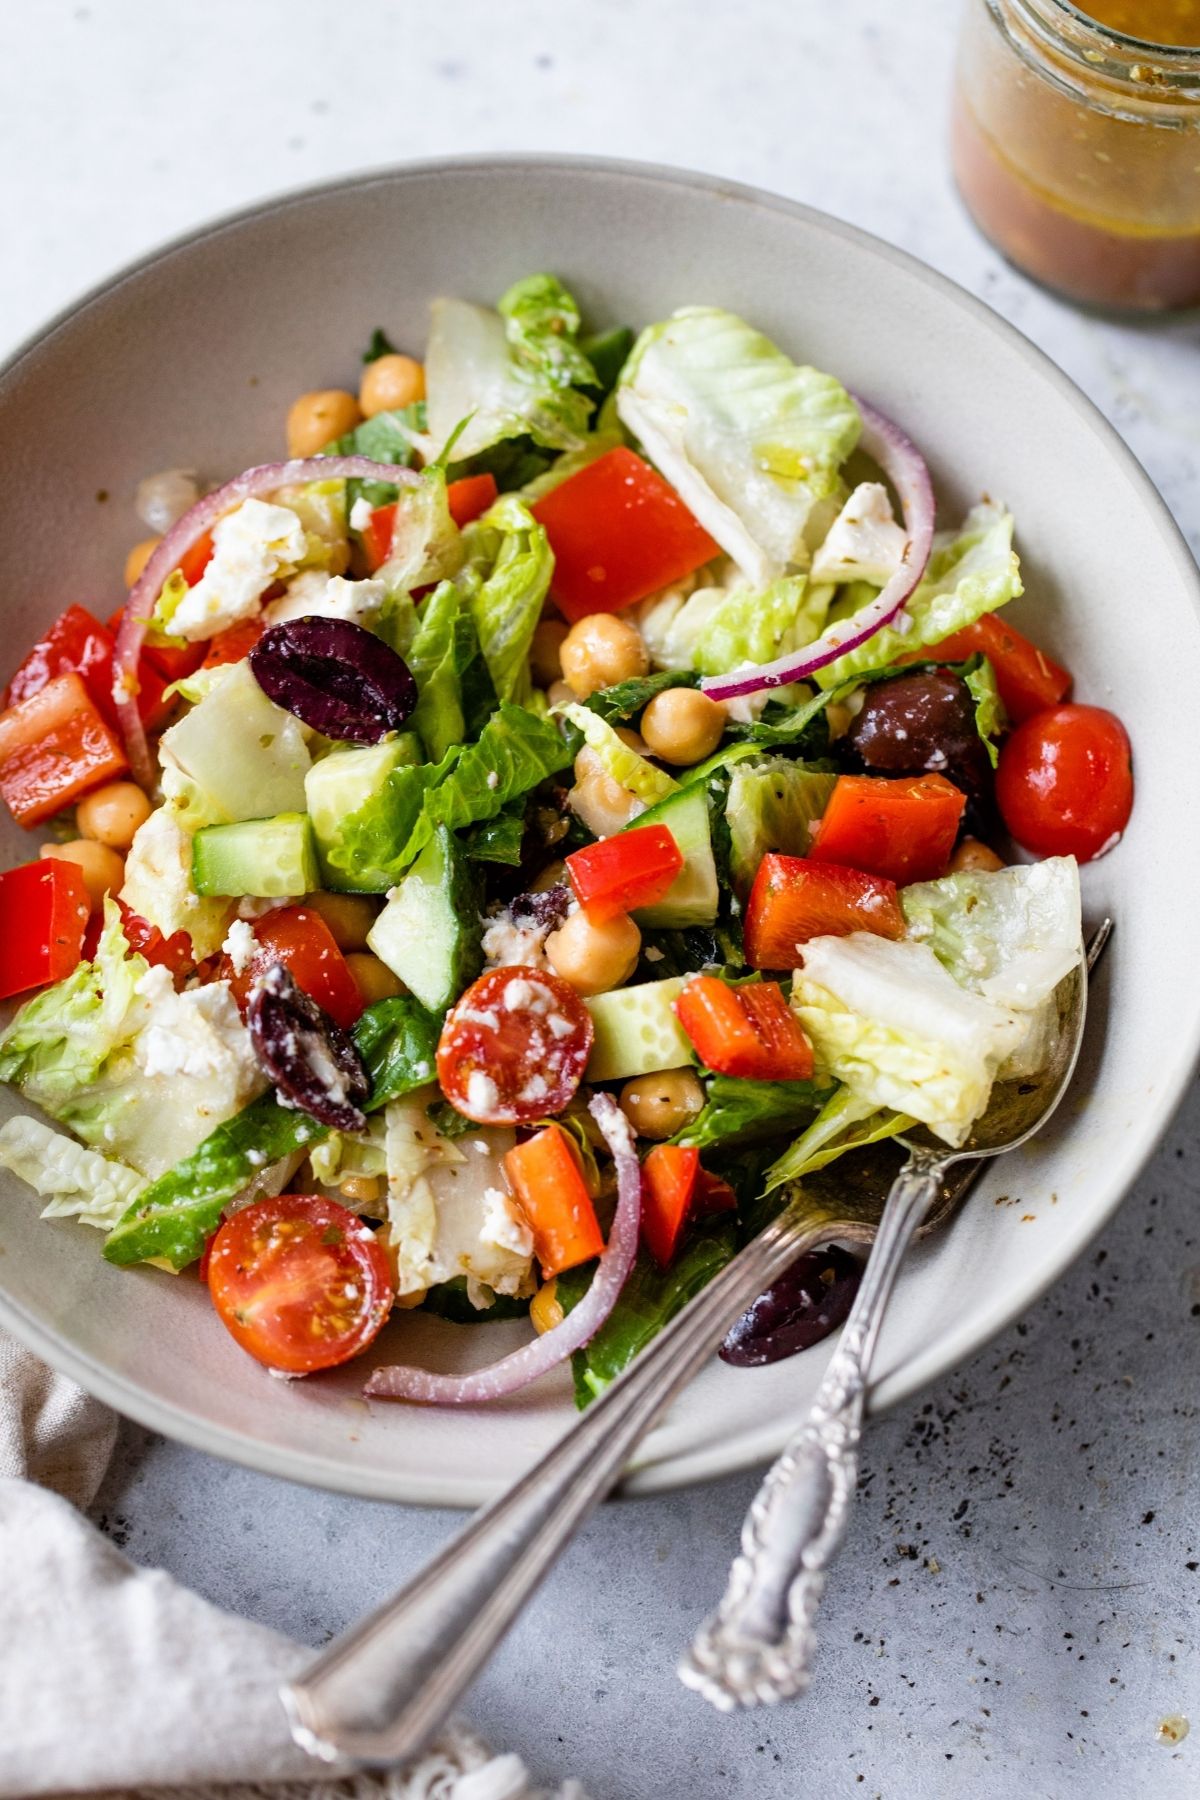 Salad with red bell pepper, olives and chickpeas in a bowl.